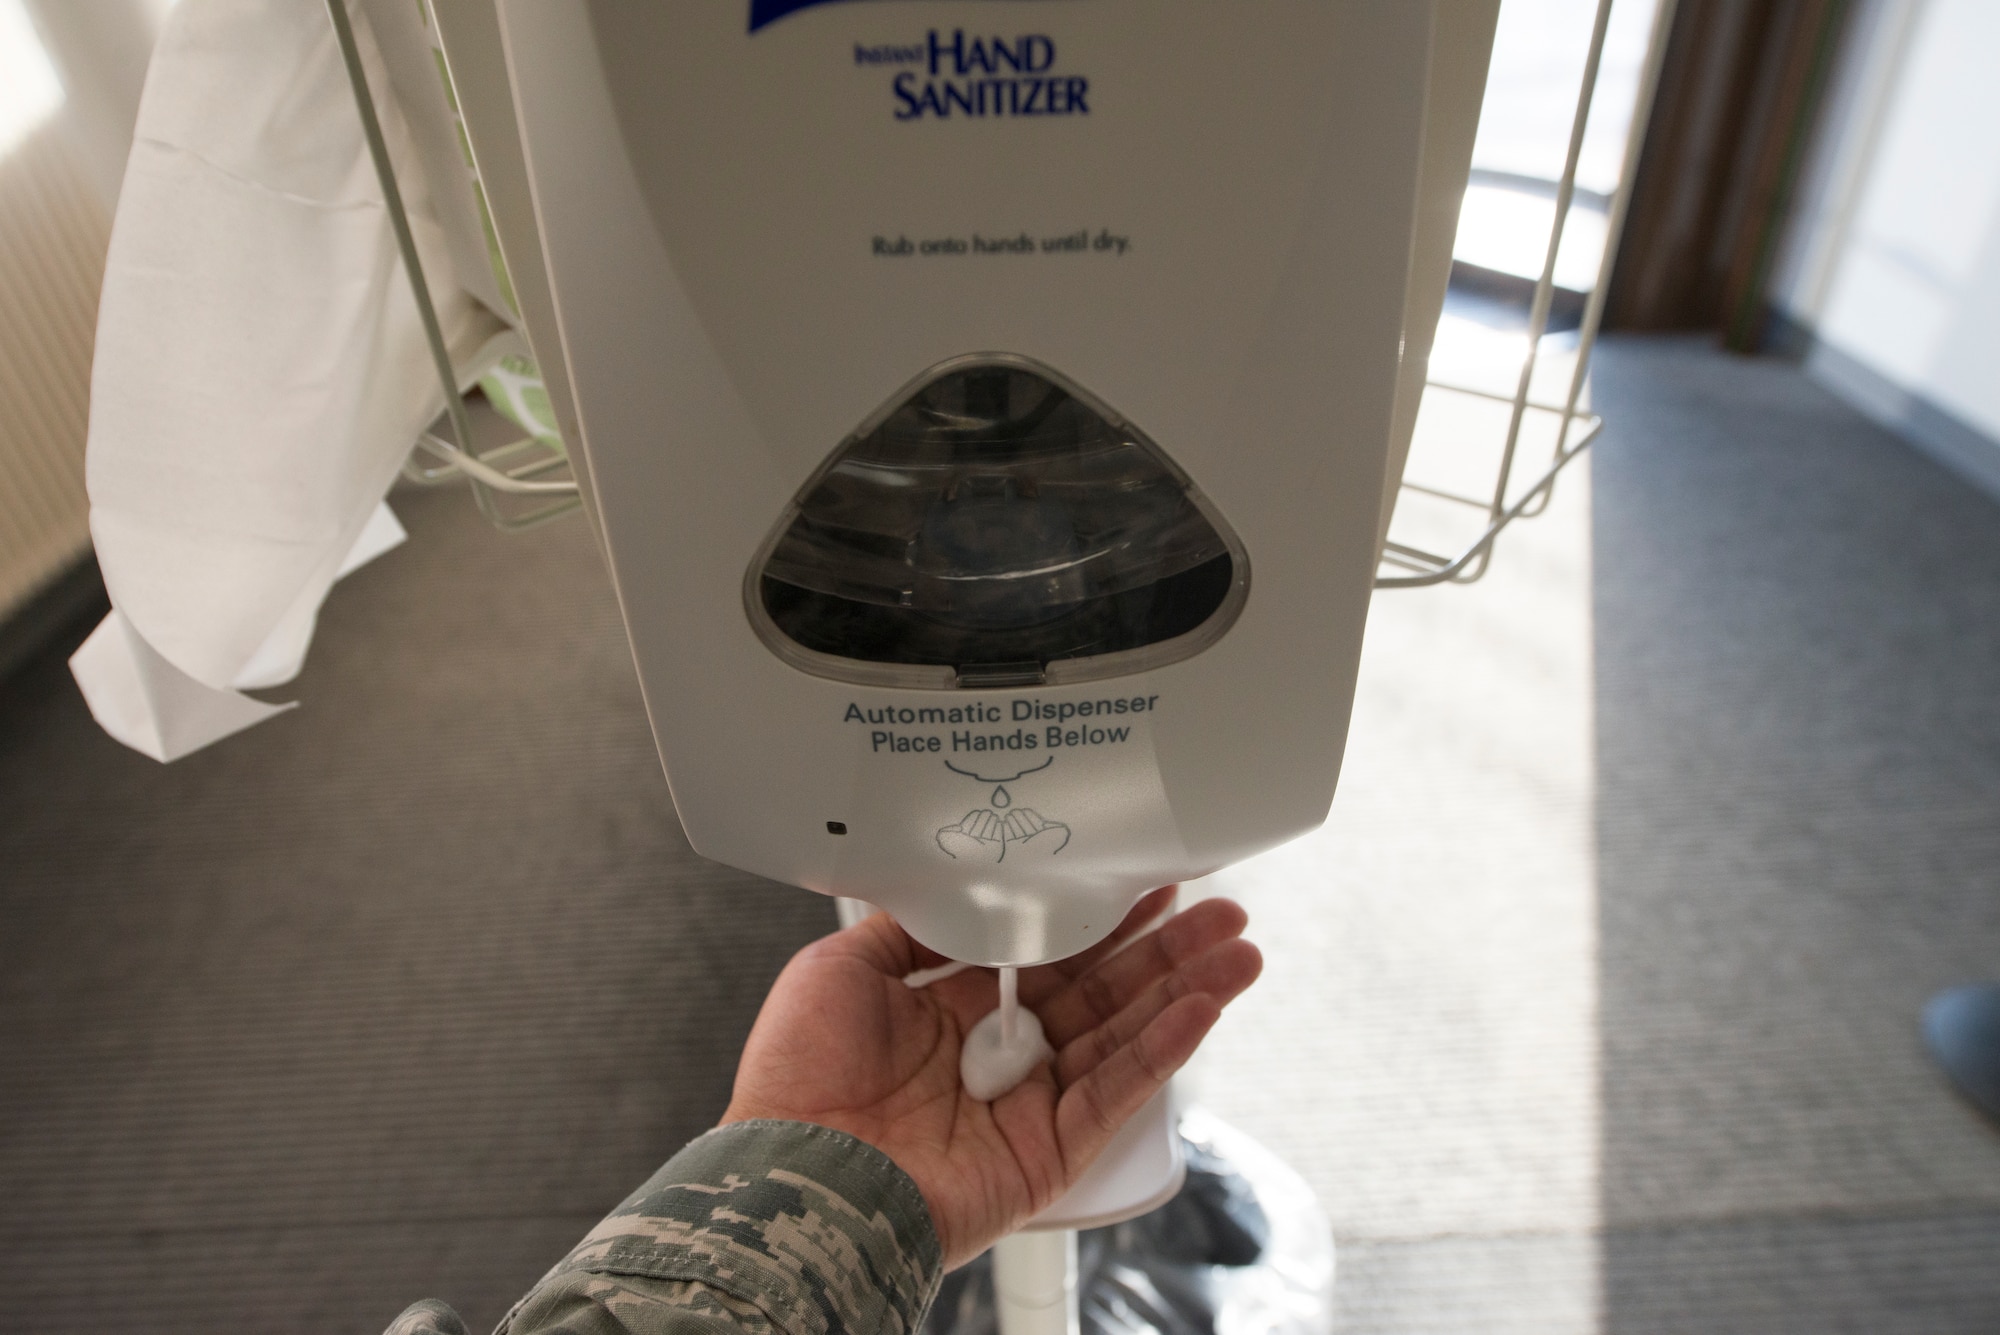 A picture of an Airman receiving hand sanitizer